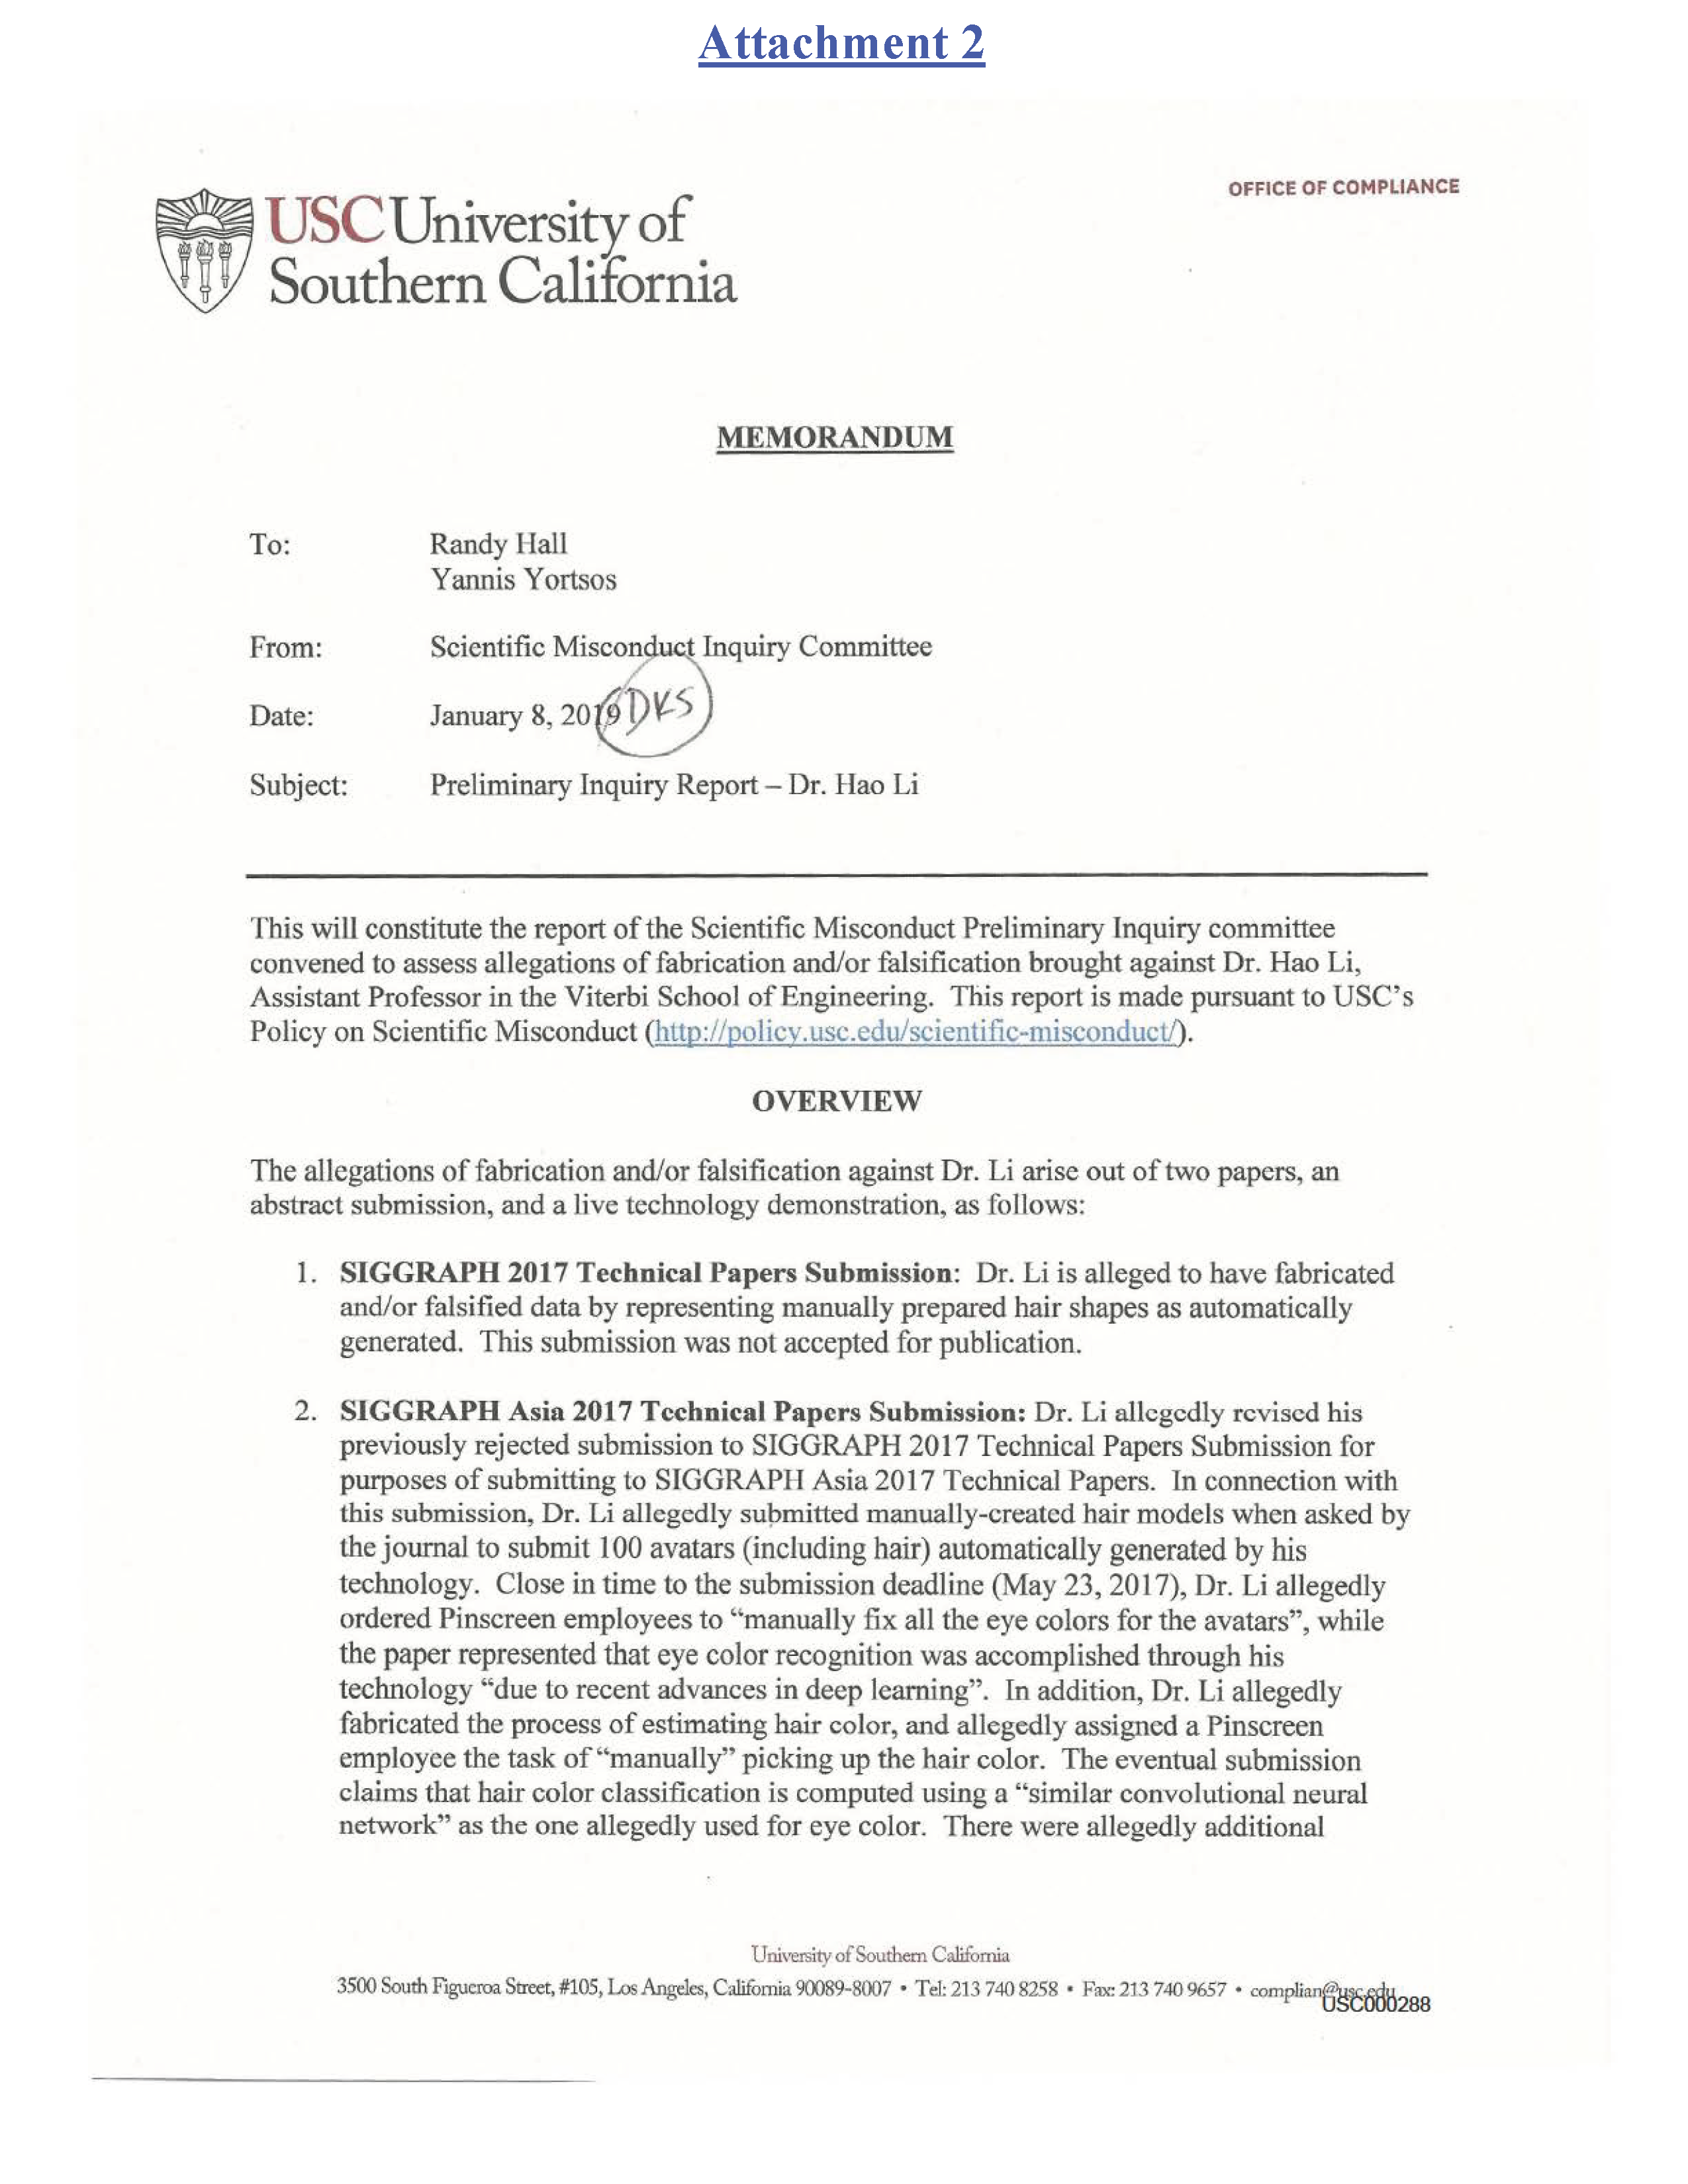 USC's Investigation Report re Hao Li's and Pinscreen's Scientific Misconduct at ACM SIGGRAPH RTL 2017 [Summary] Page 18